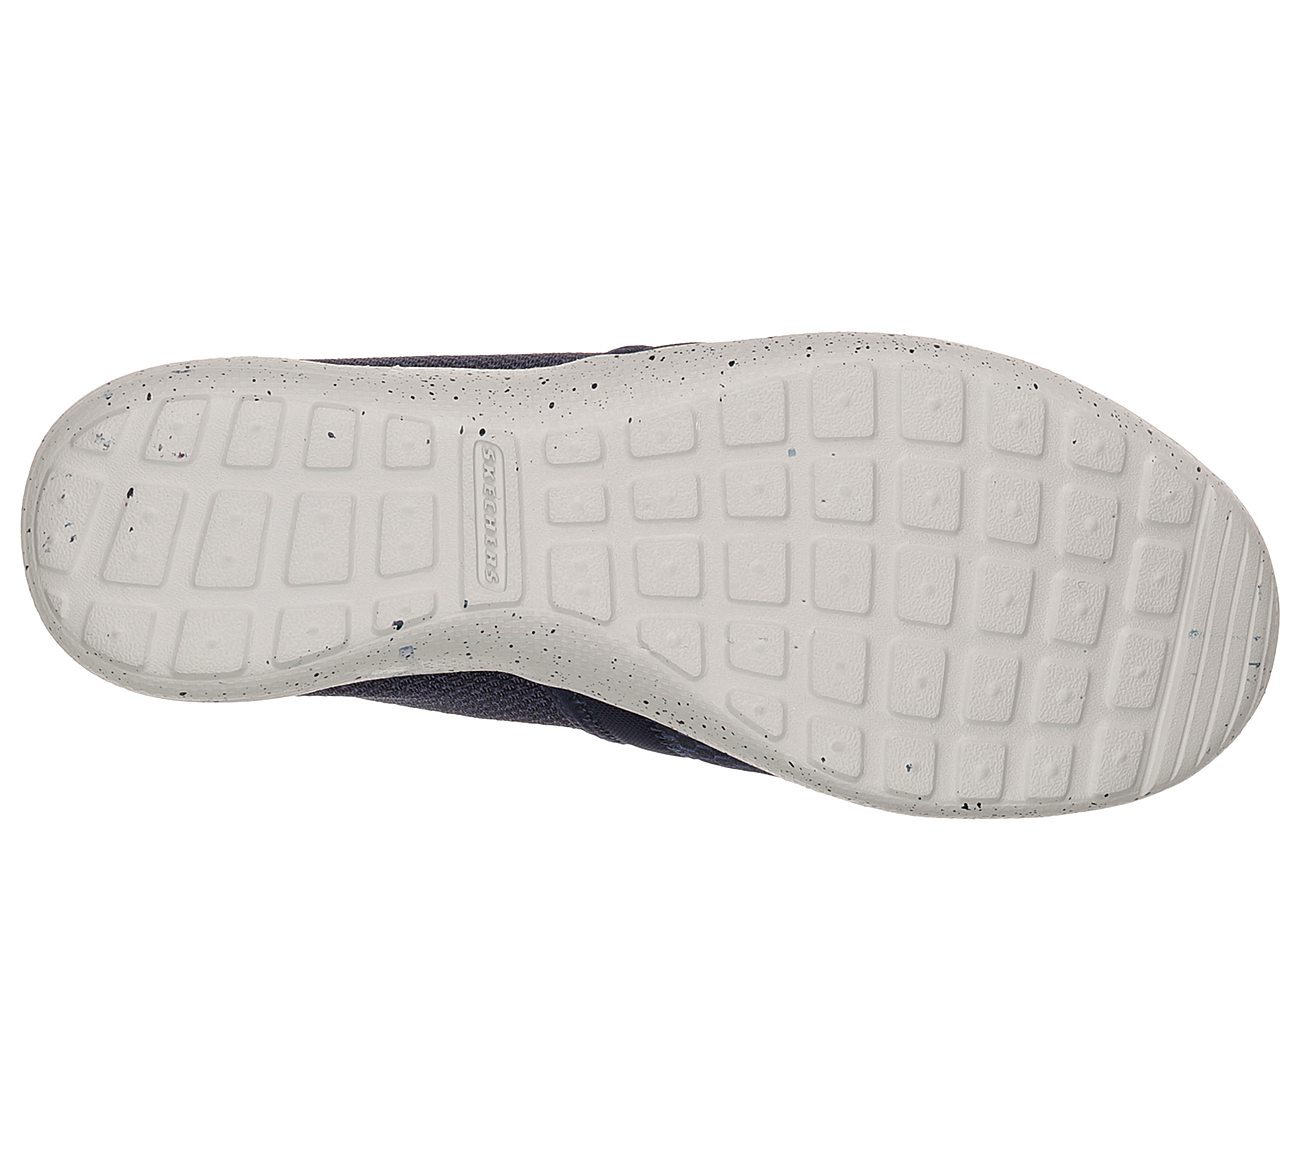 skechers air cooled womens shoes